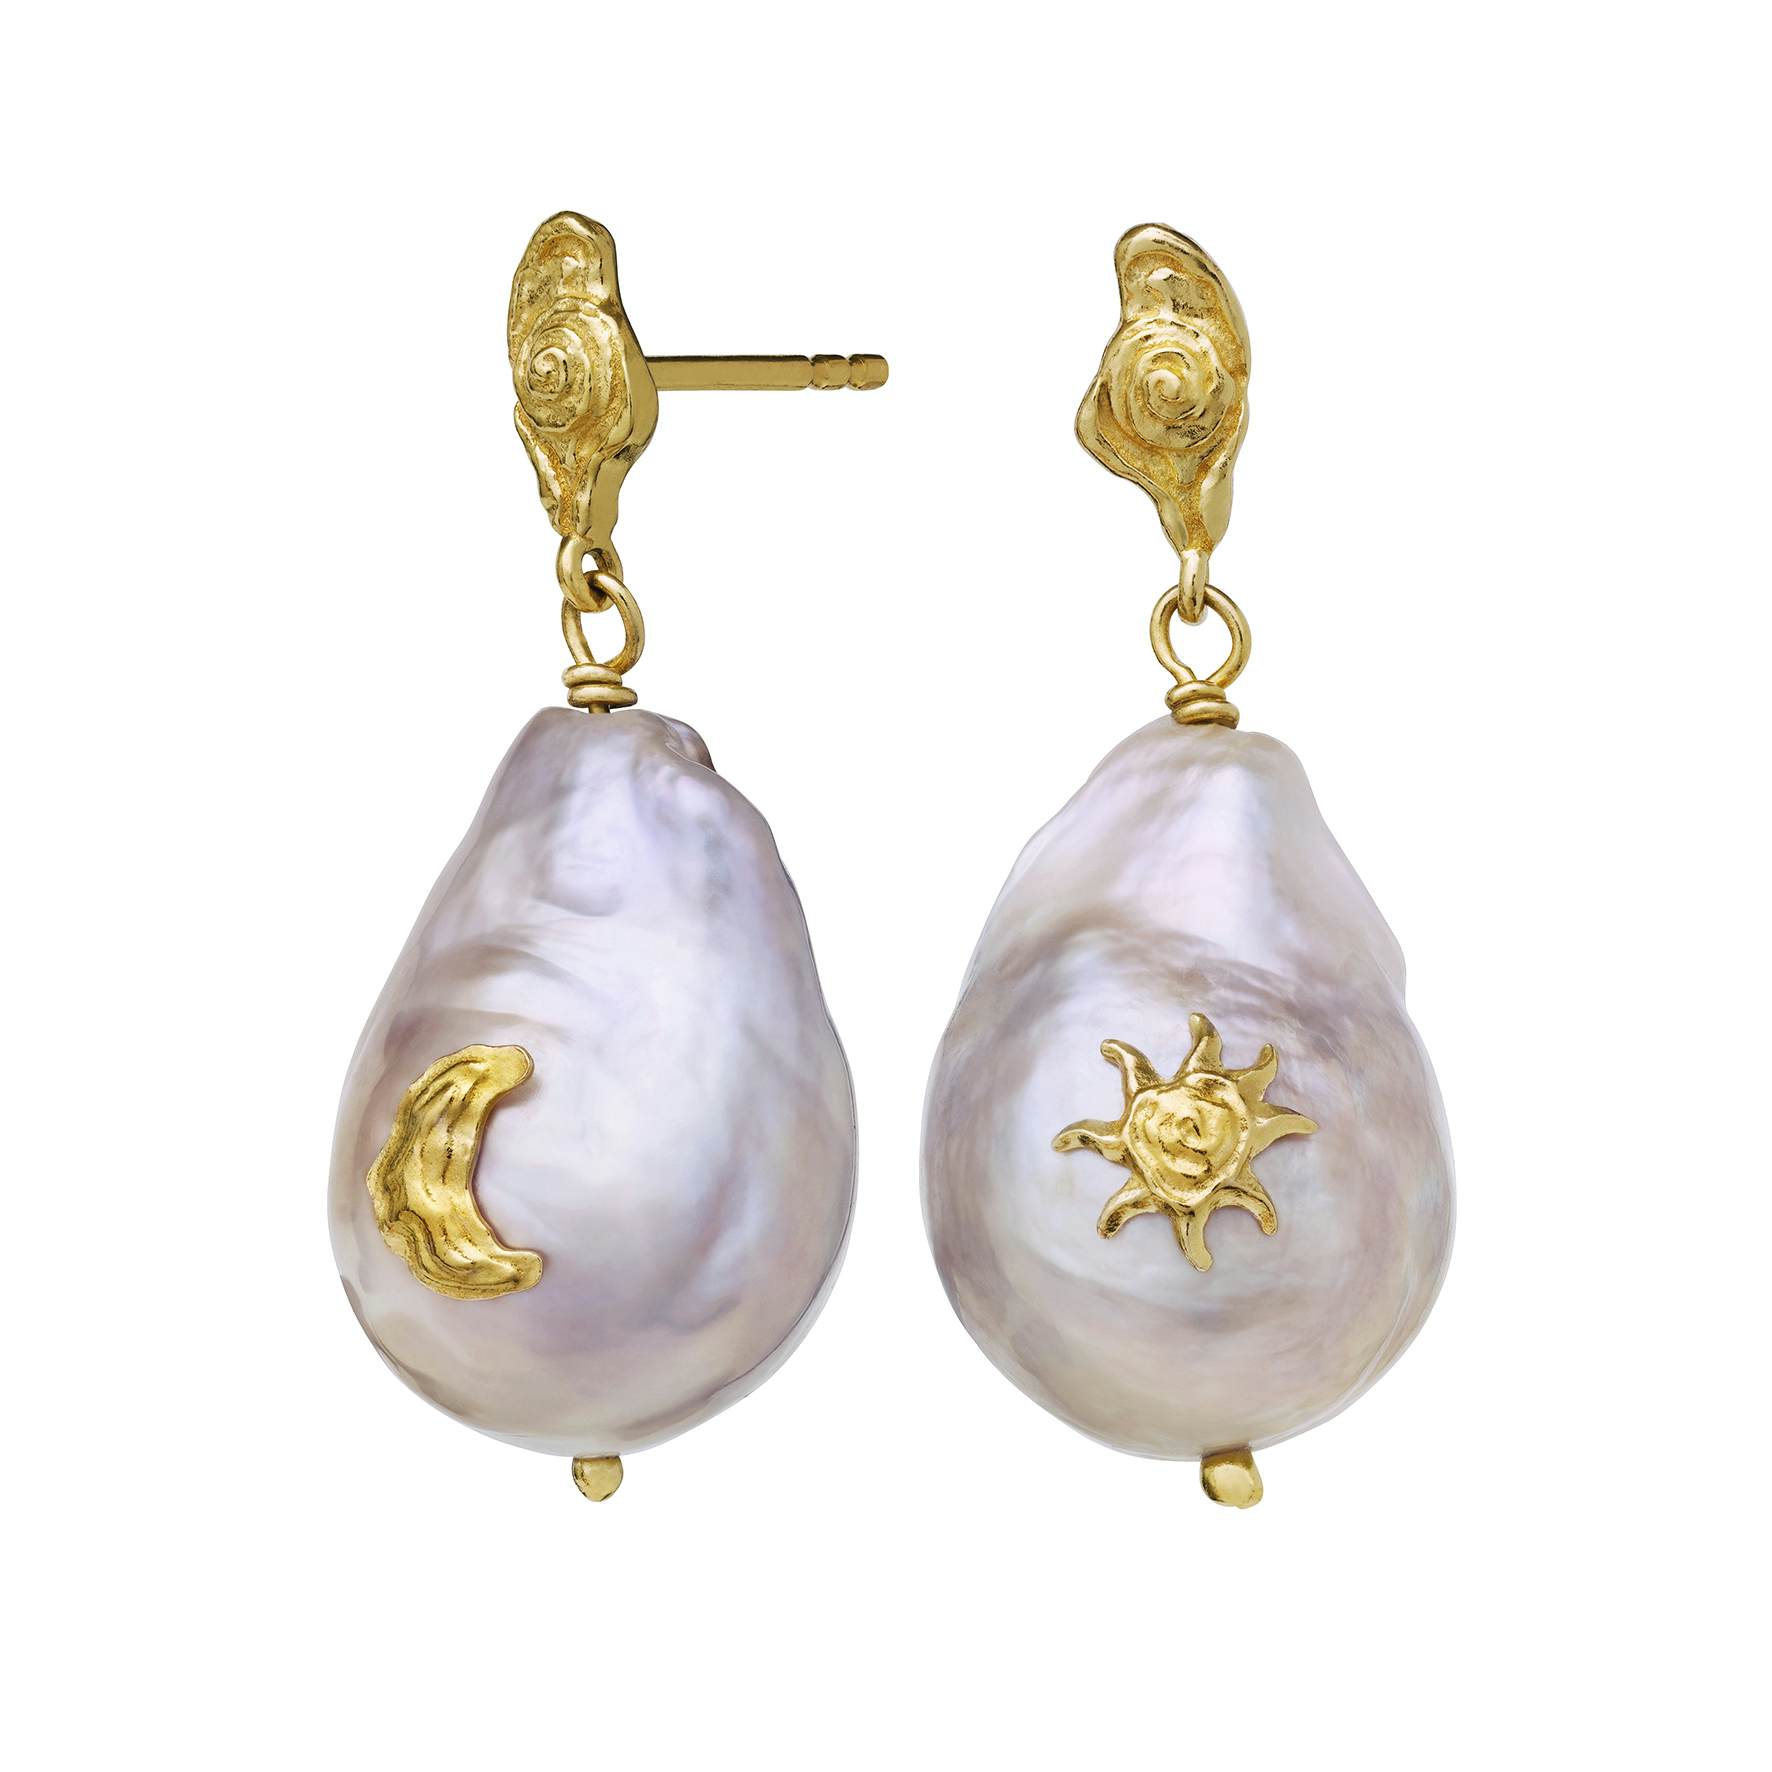 Skæbne Hurtig shampoo See the Claire Earrings from Maanesten in Goldplated-Silver Sterling  925|Freshwater Pearl